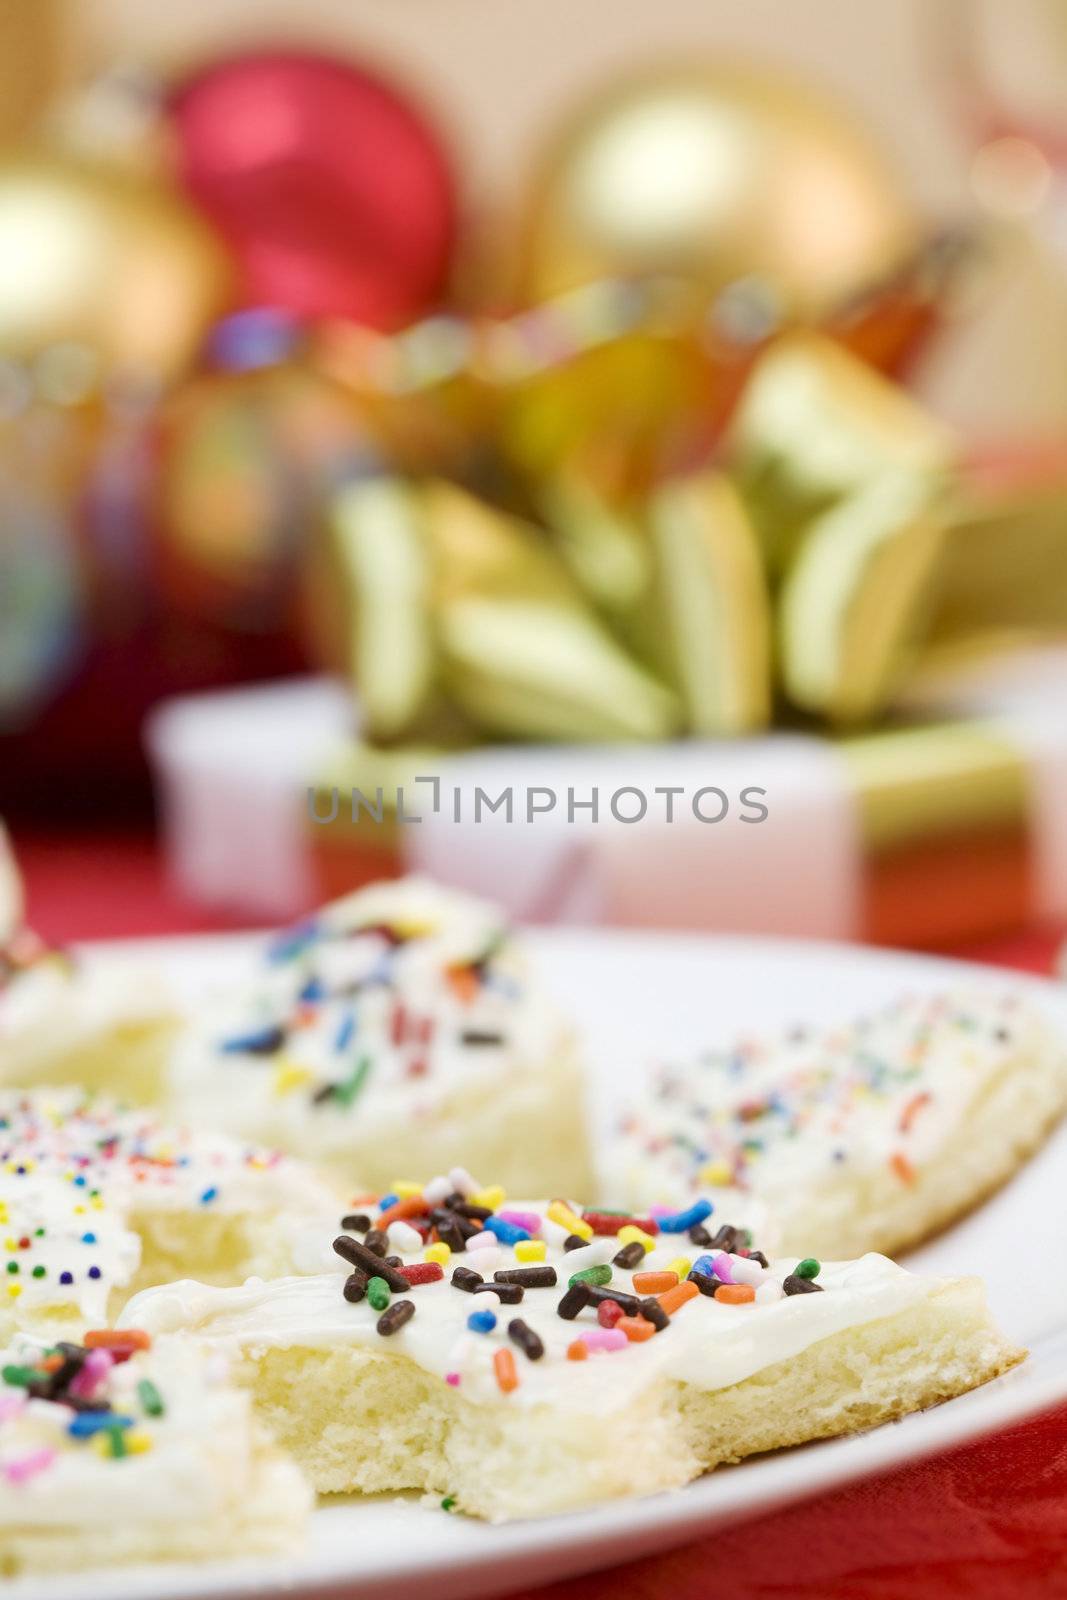 Frosted cake pieces with sprinkles, present and Christmas decorations in background